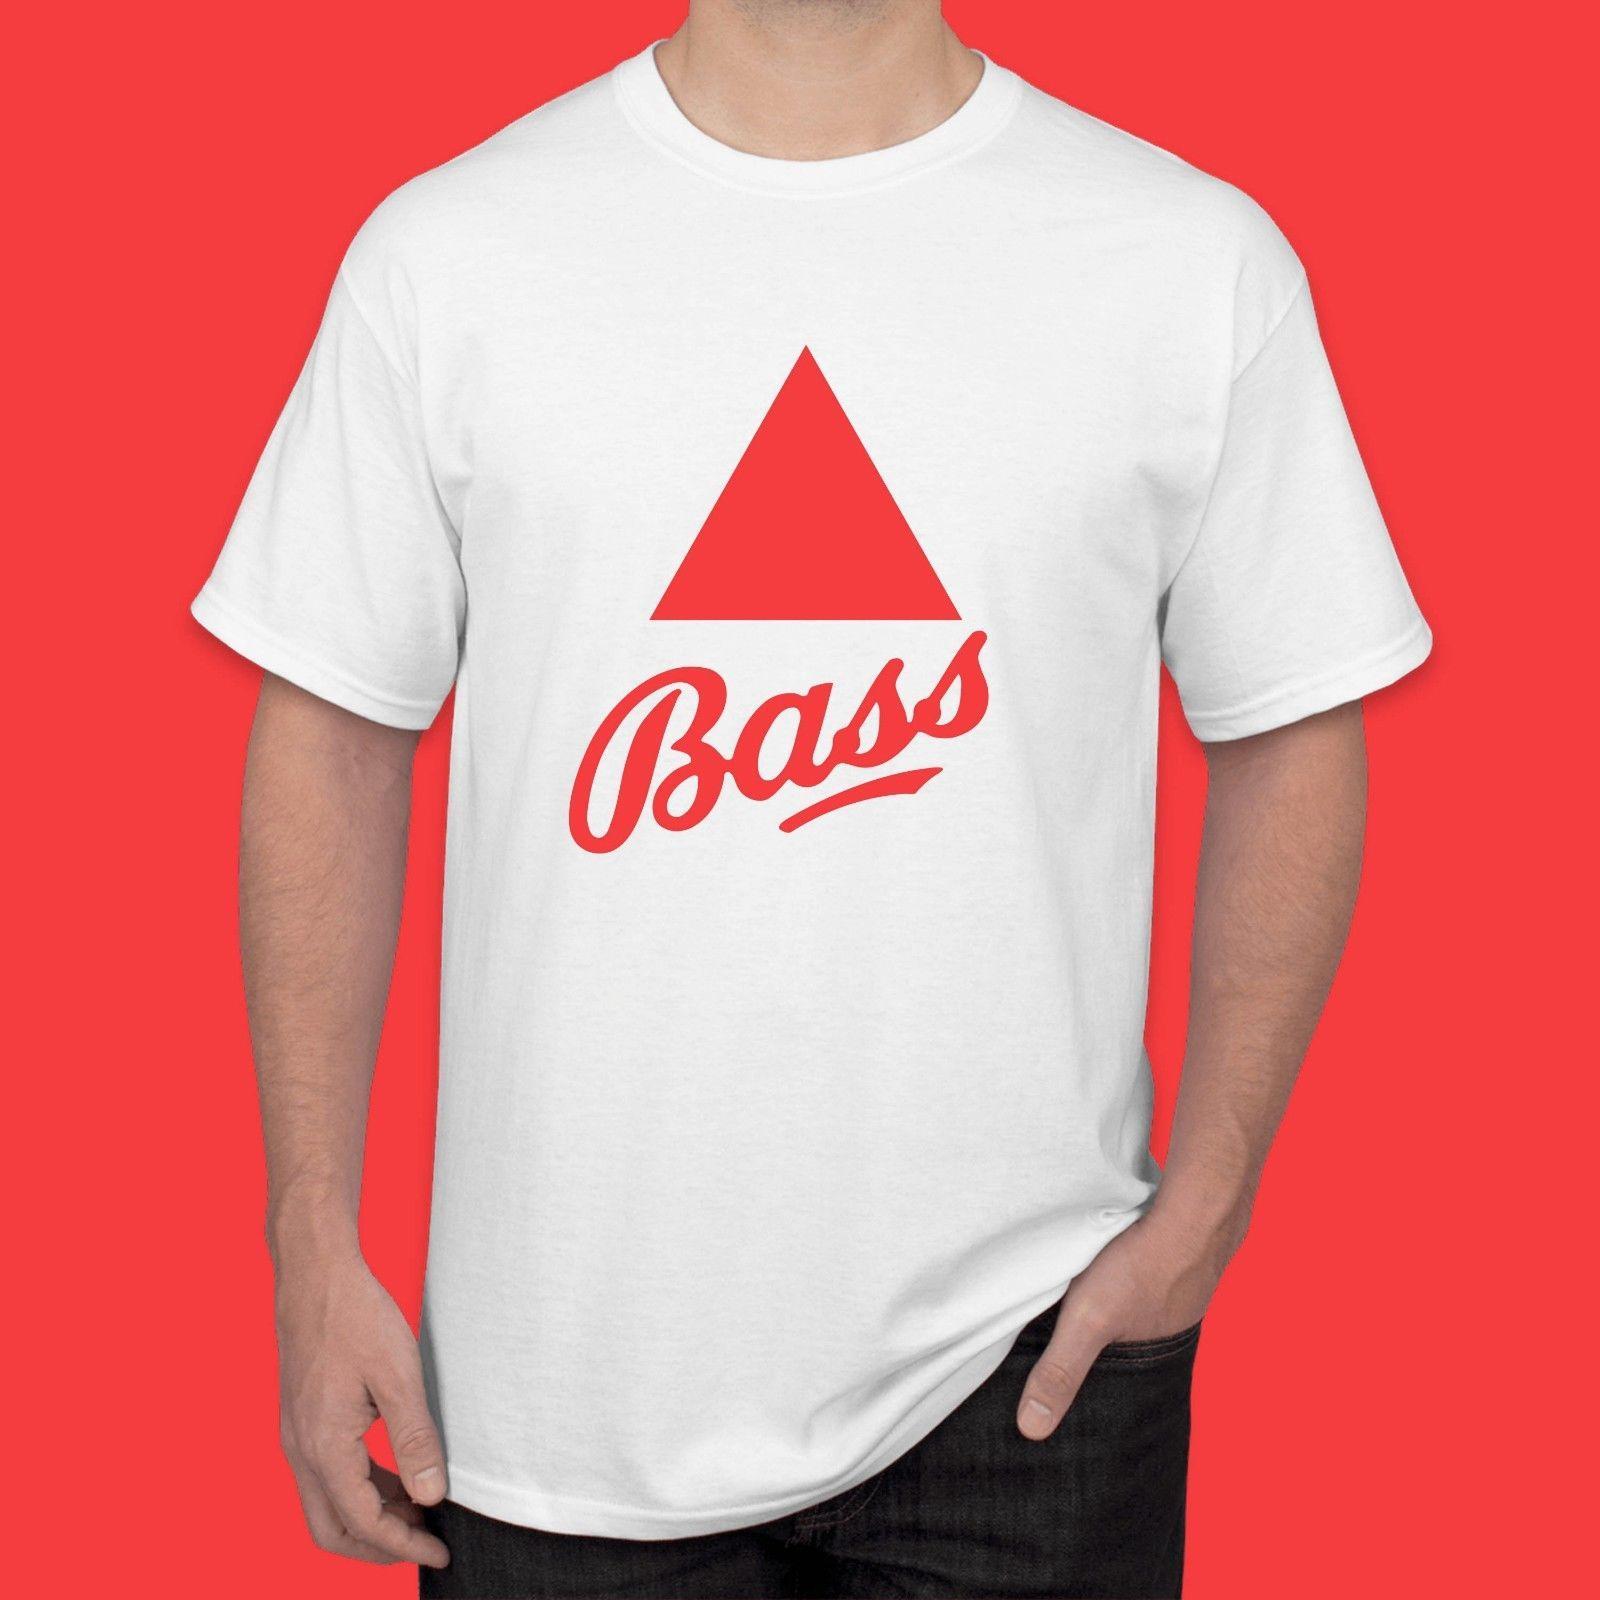 Bass Beer Logo - New Bass Ale Beer Brewing Red Logo Men'S Tee White T Shirt Sizes ...